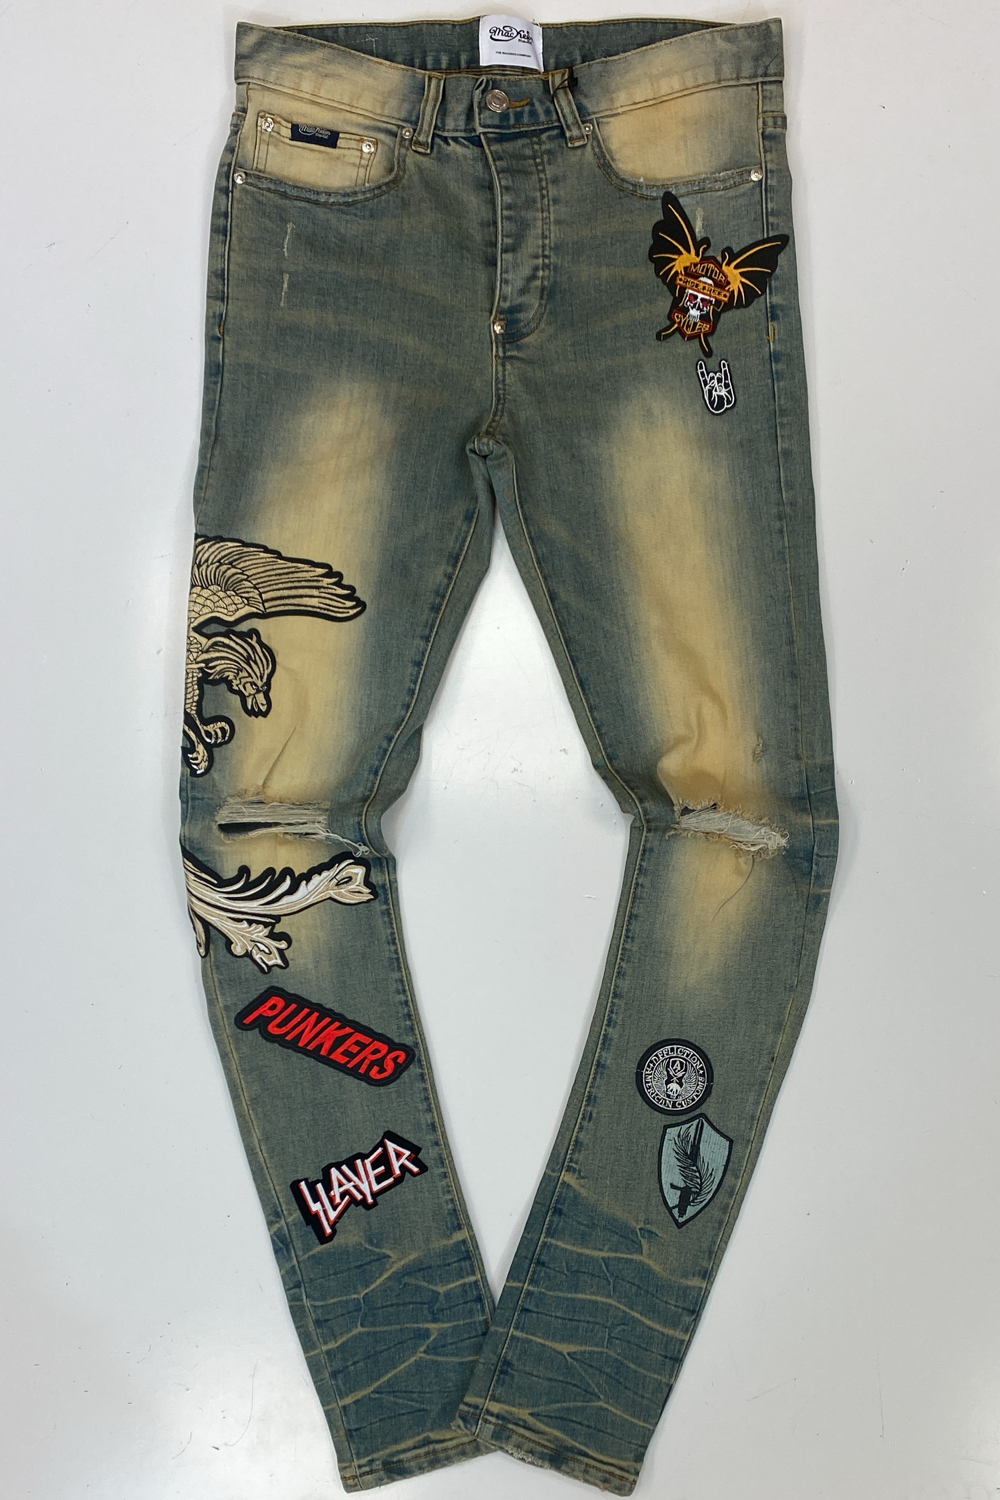 Mackeen- patched jeans